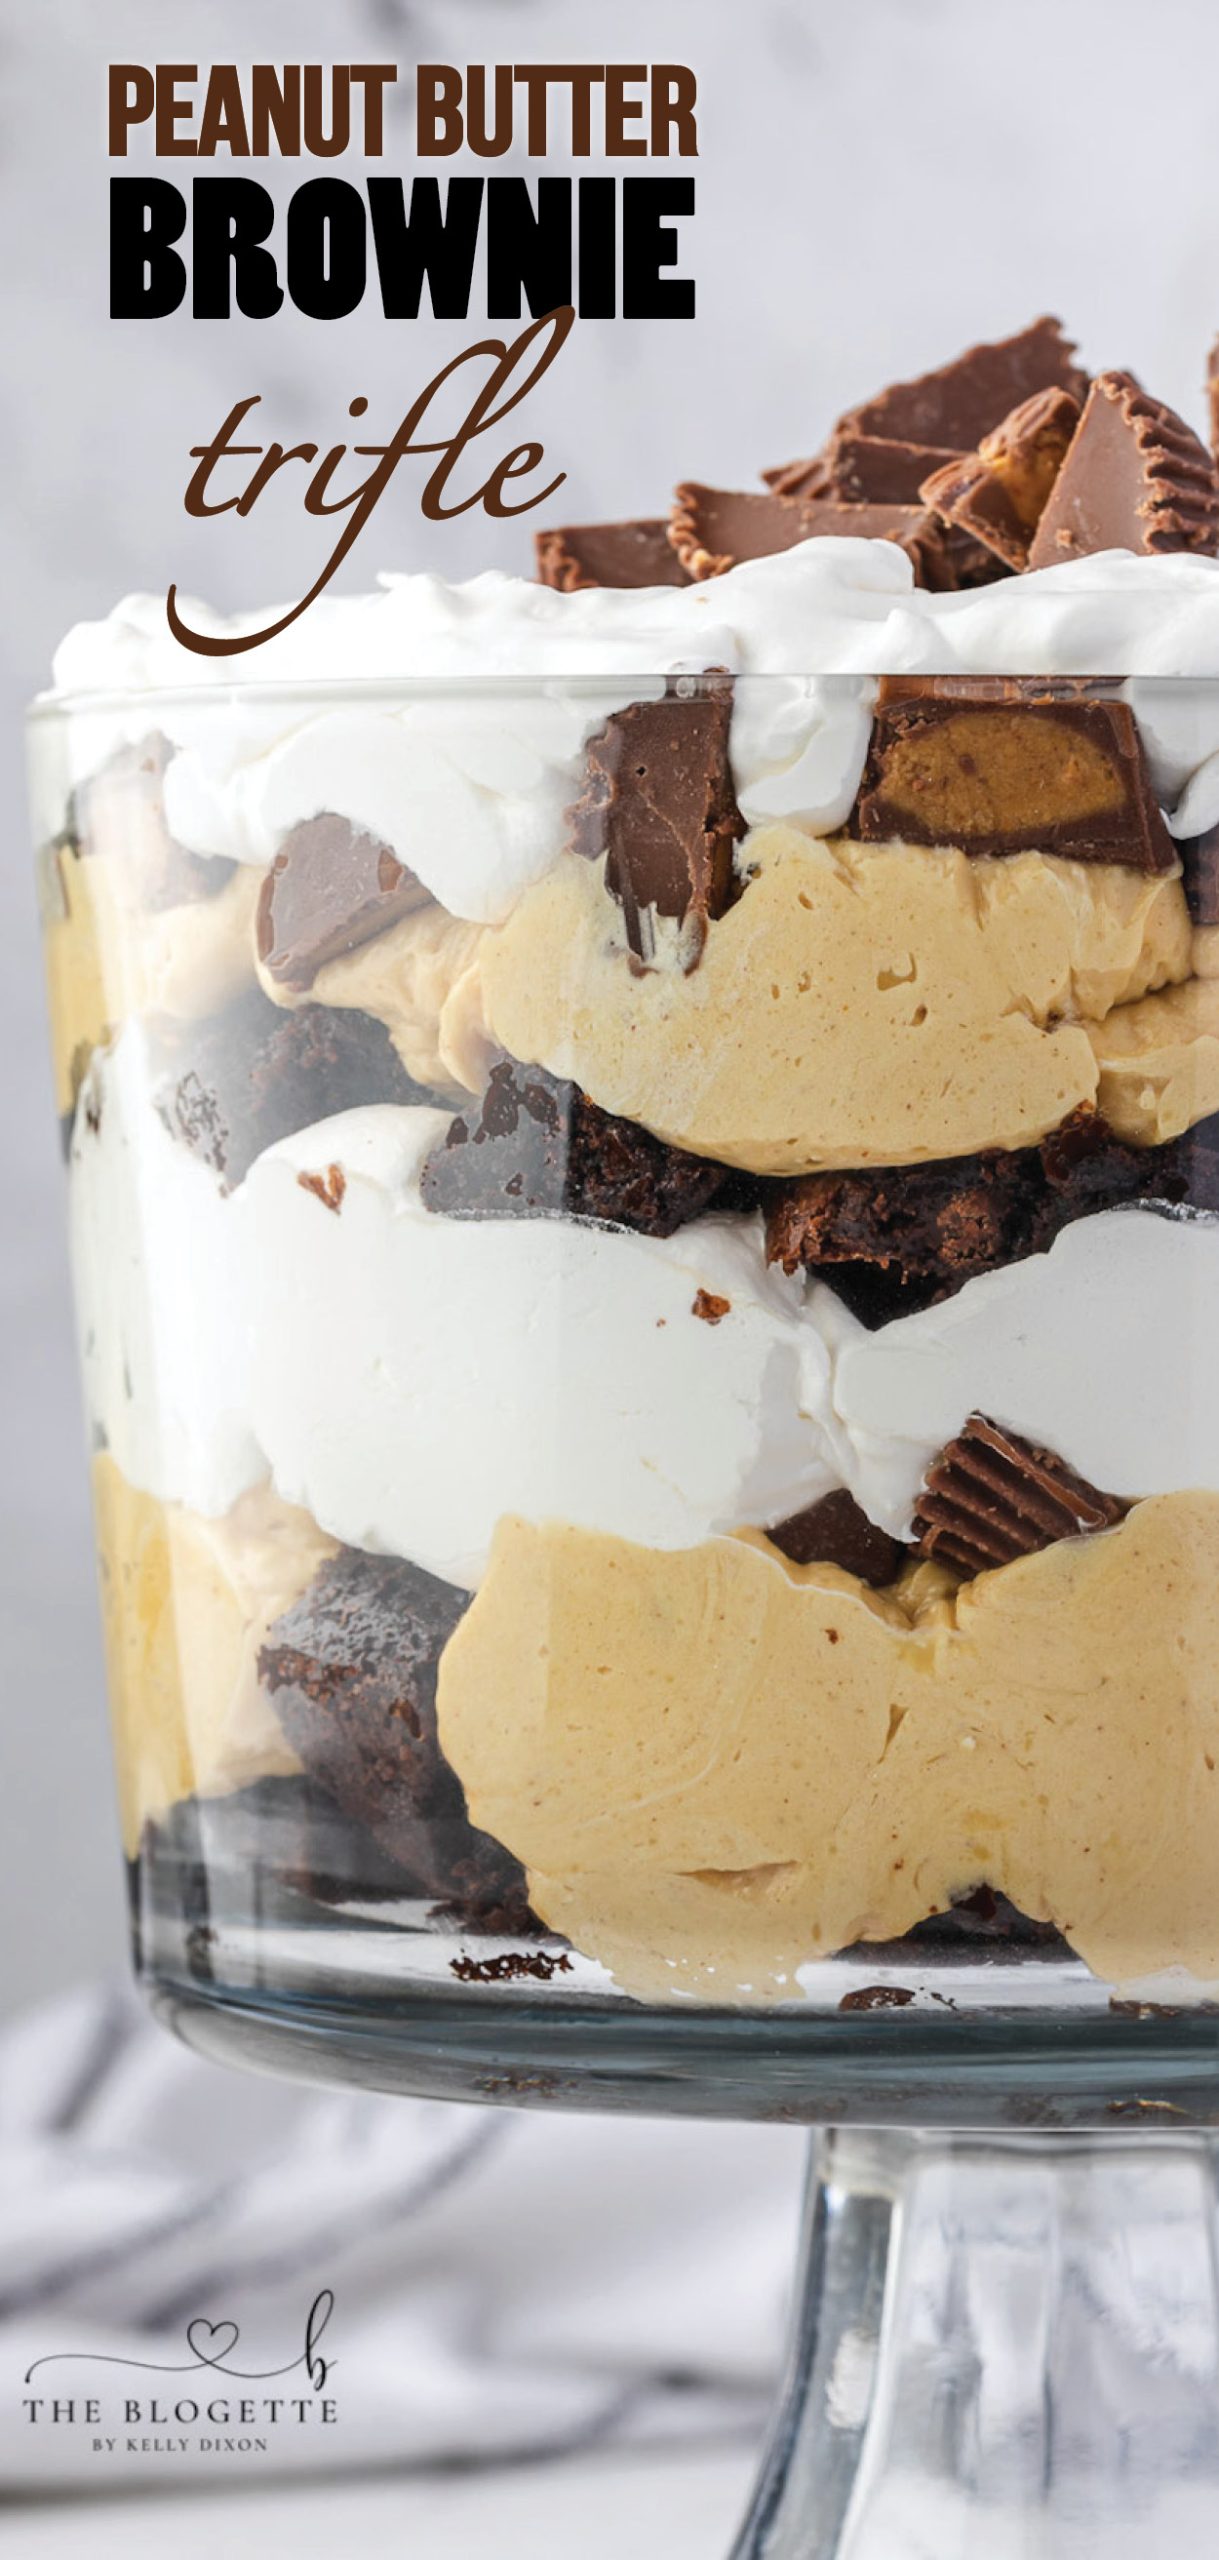 Peanut Butter Brownie Trifle - Trifles used to be more common, it seems like folks hardly ever make them anymore. Their beauty is undeniable though!